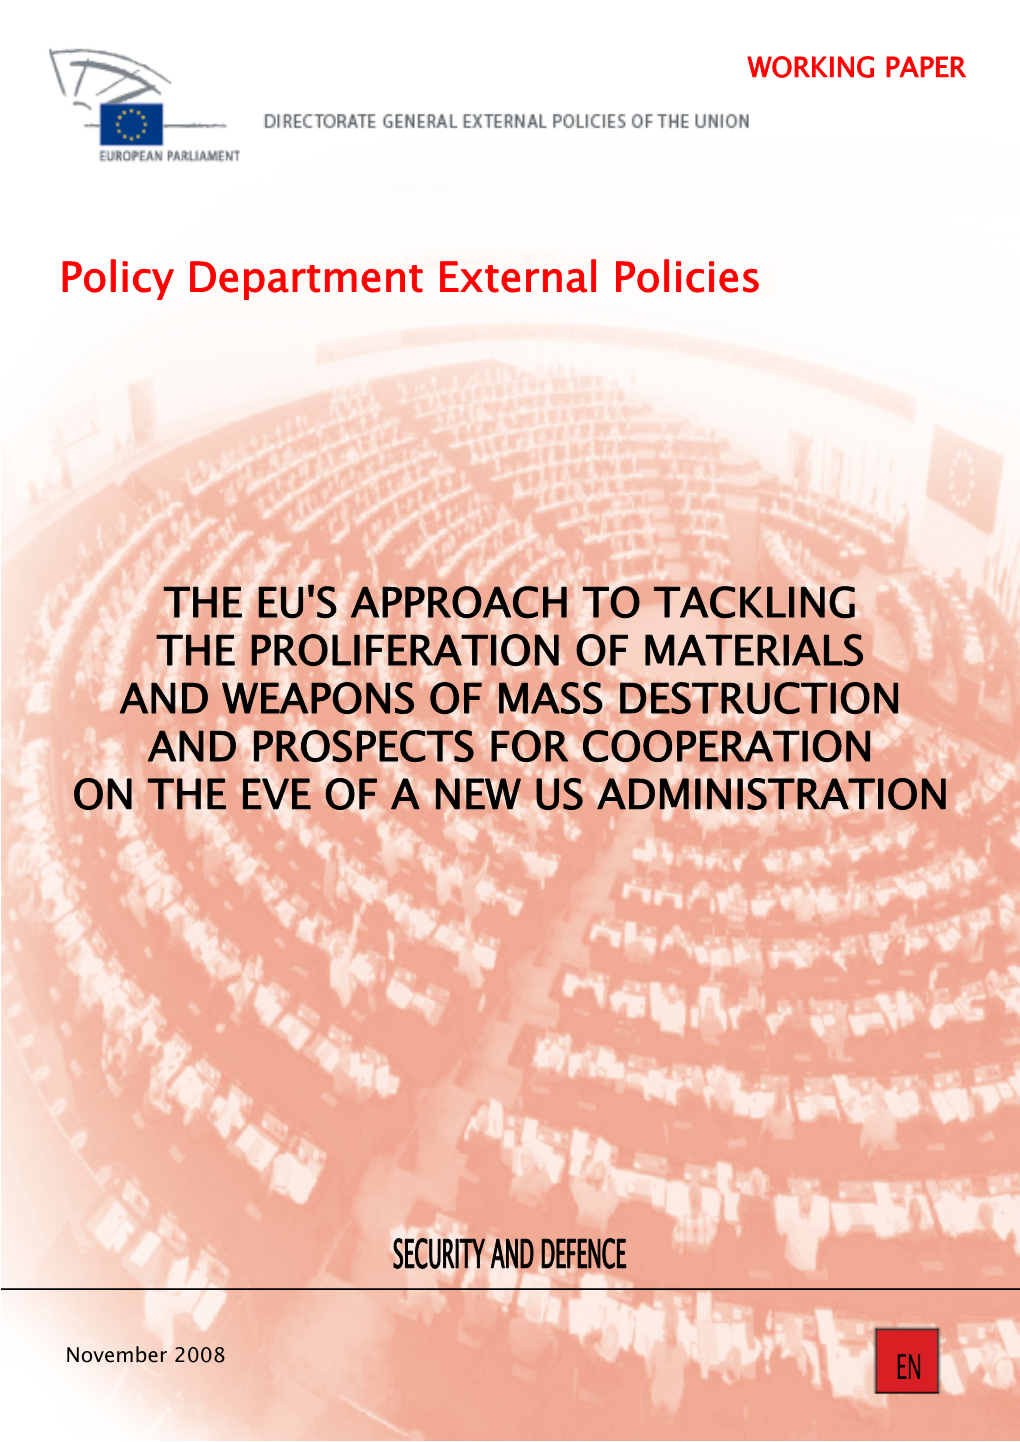 Policy Department External Policies the EU's APPROACH to TACKLING THE